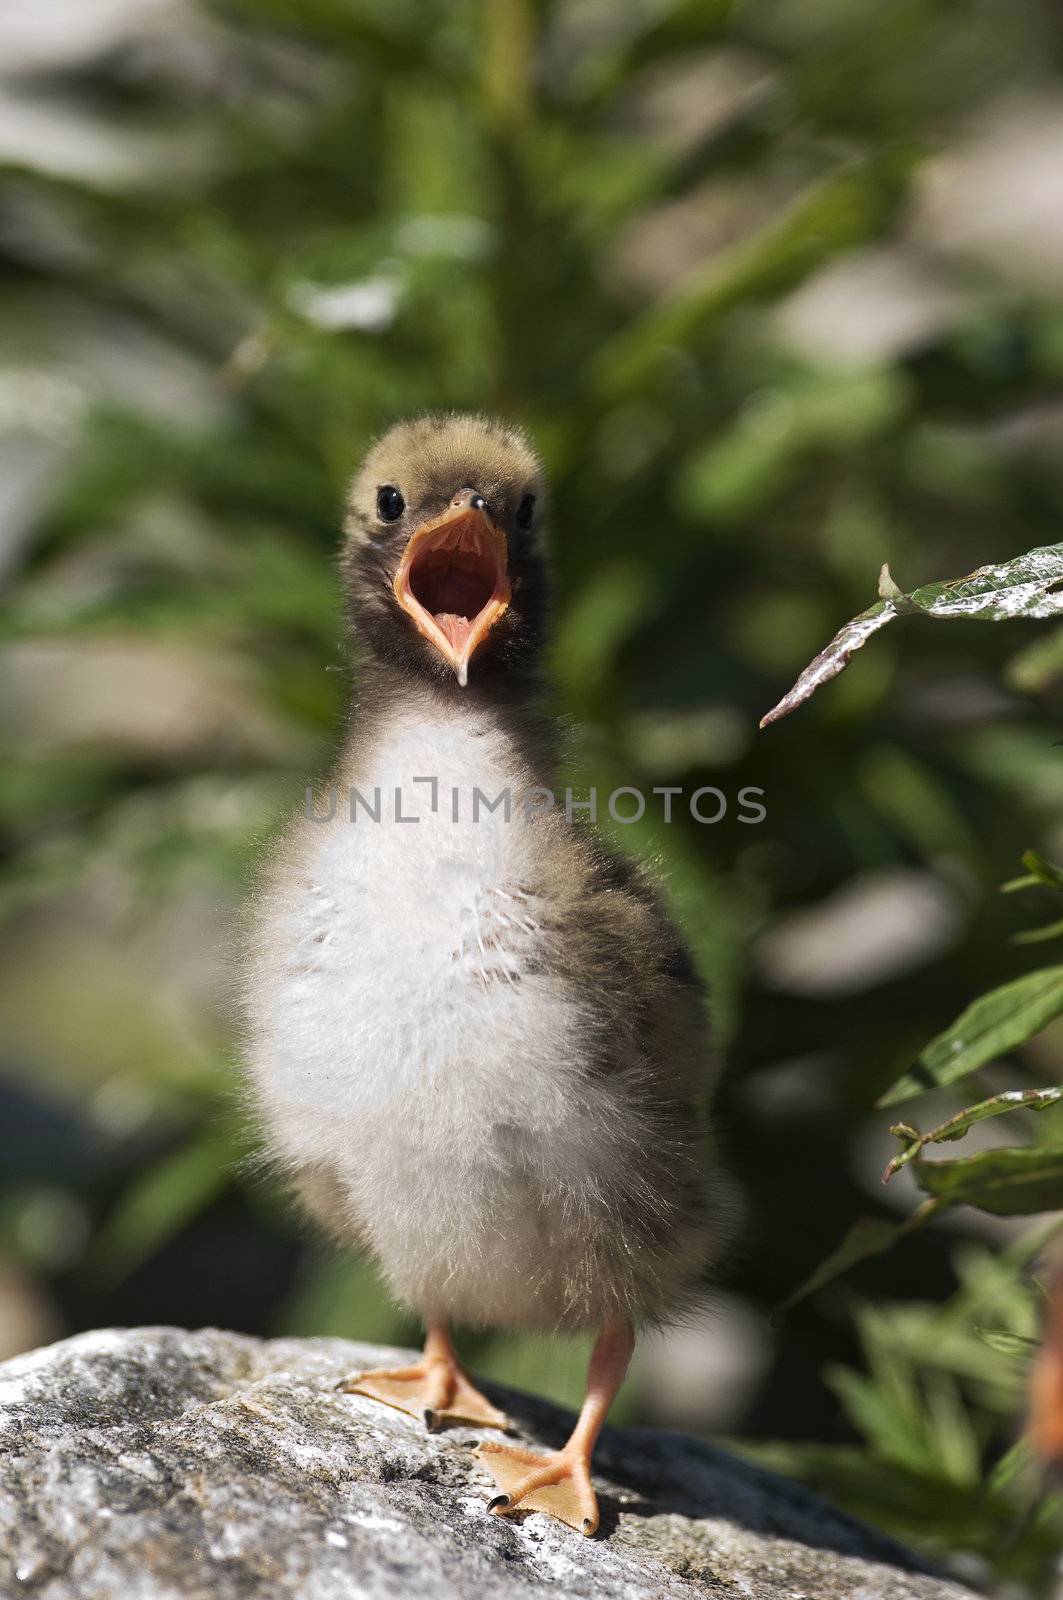 The baby bird of the river tern calls mum and demands food.